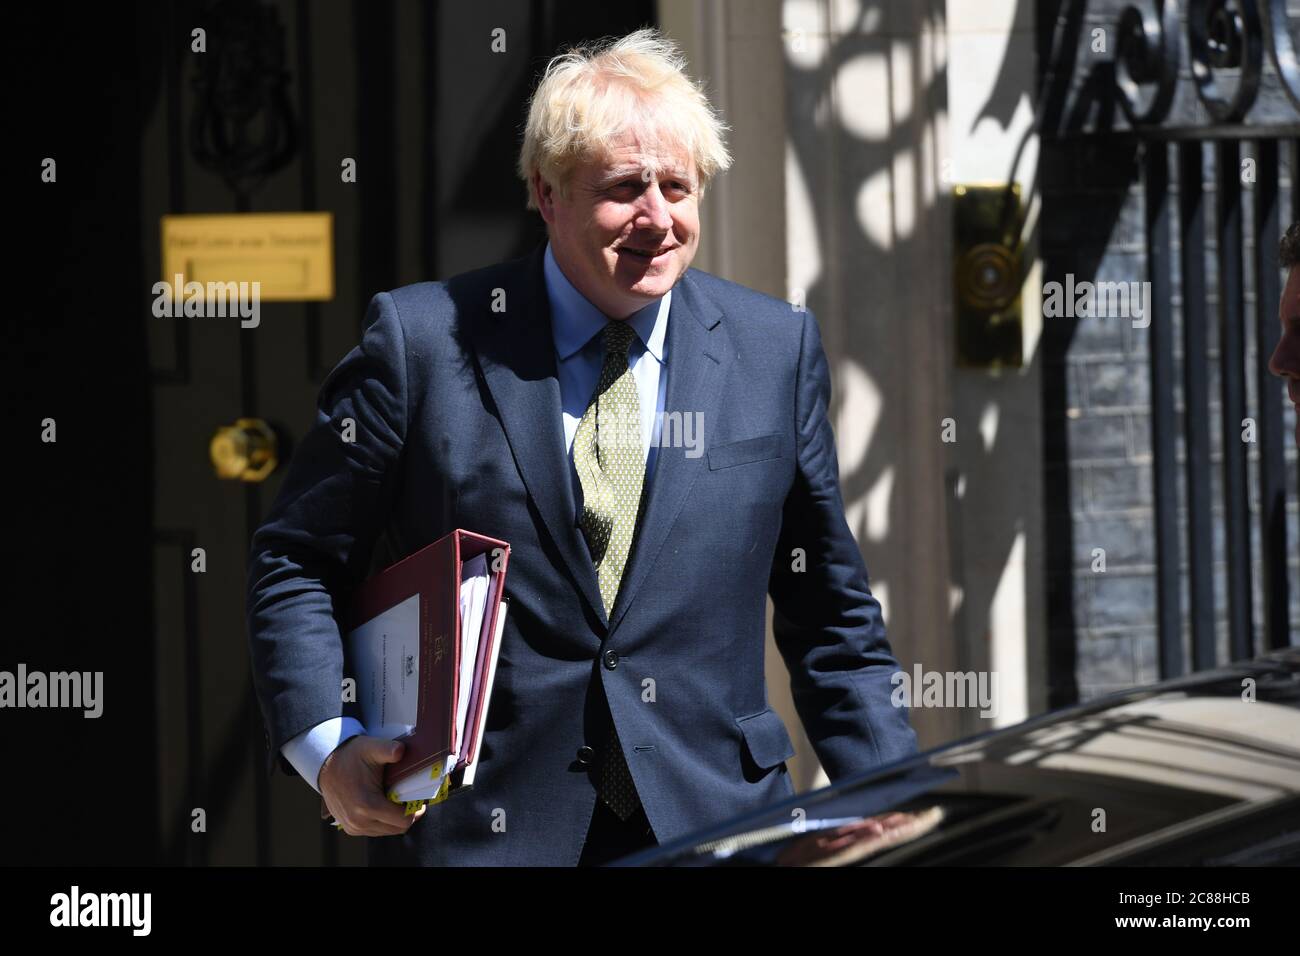 Prime Minister Boris Johnson leaves 10 Downing Street, London, for PMQs in the House of Commons. Stock Photo